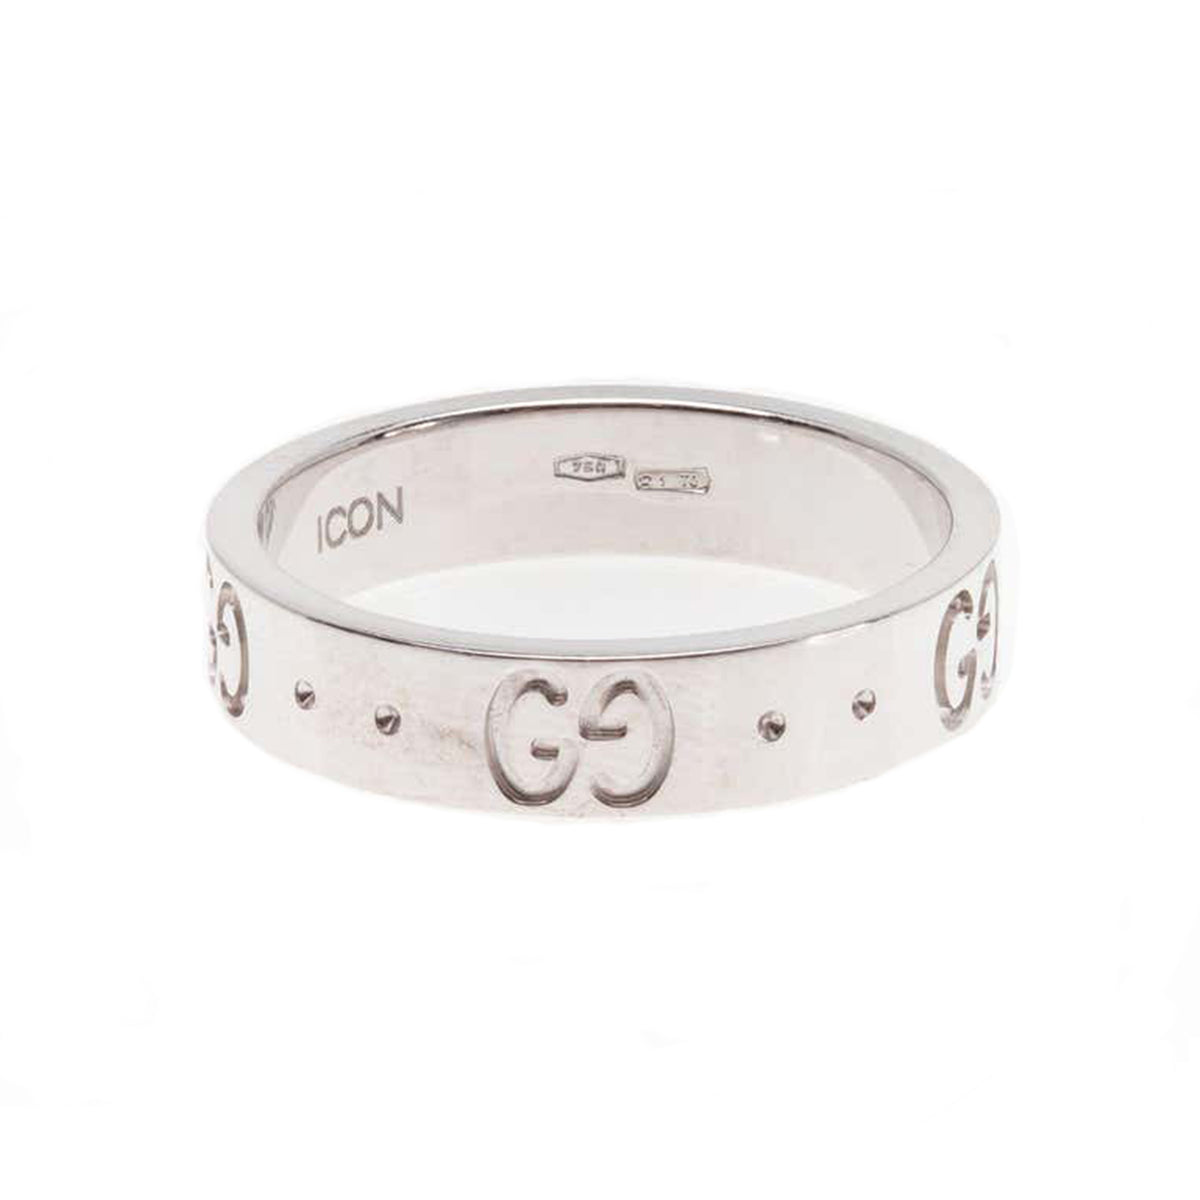 Signed Gucci Icon Collection Monogram Band Ring in 18 Karat White Gold